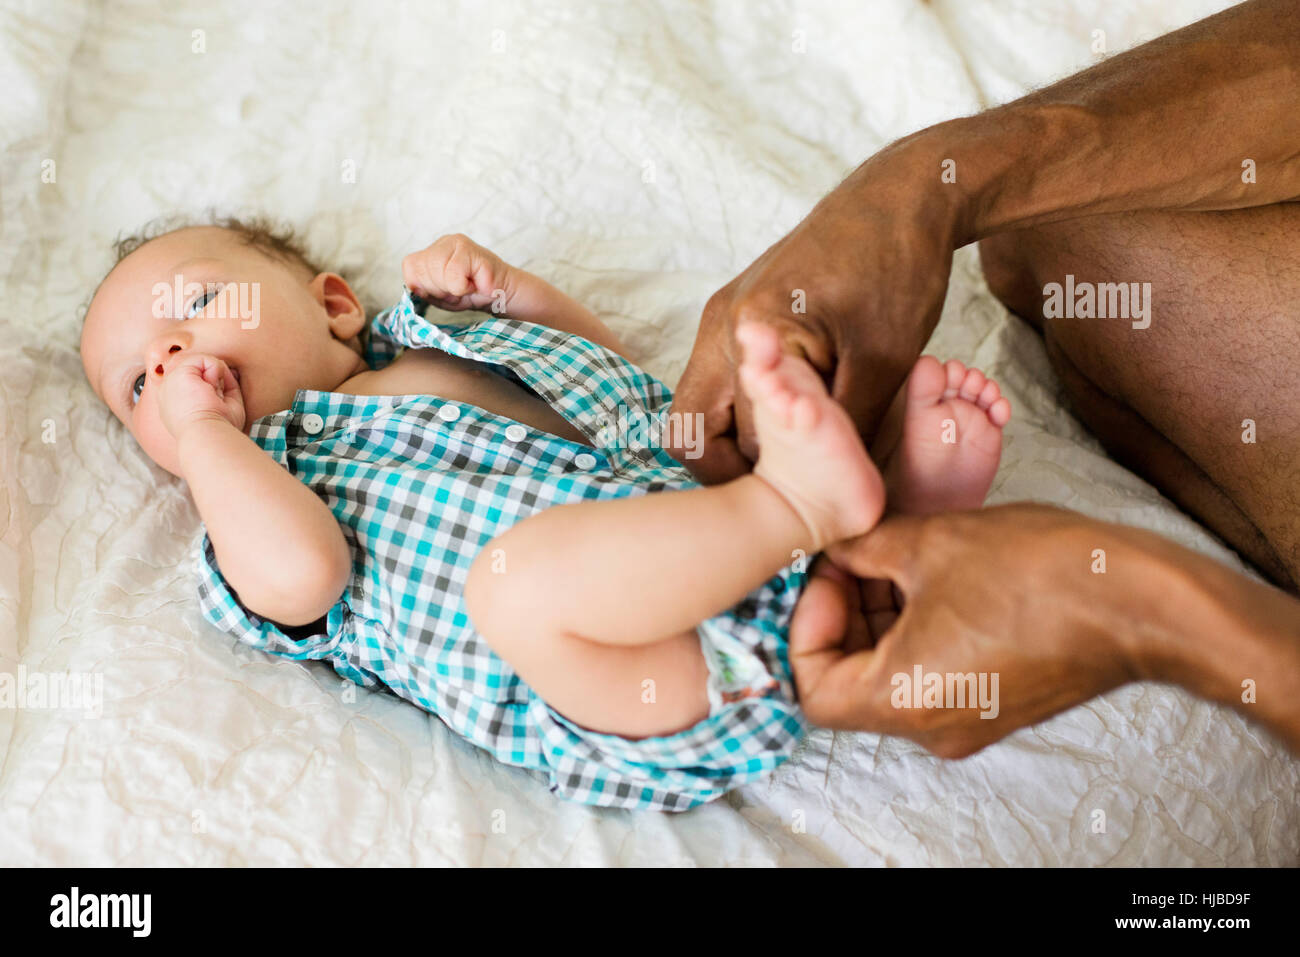 Father dressing up baby in bed Stock Photo